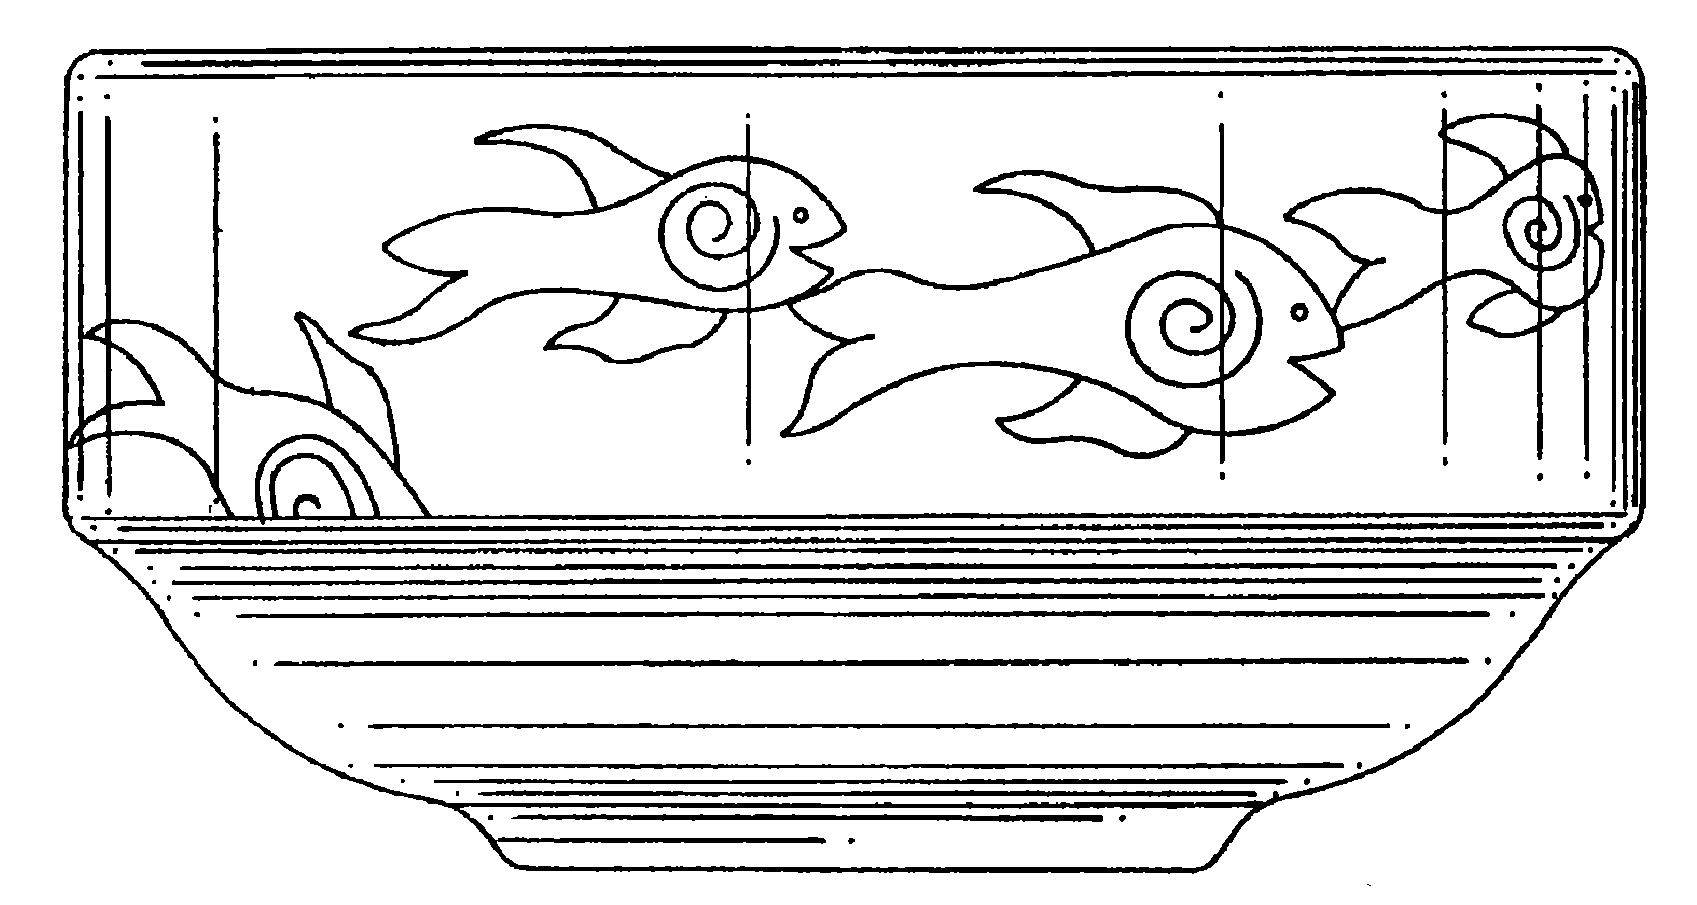 Example of a design for a food server with simulative ornamentationon an exterior surface.  
